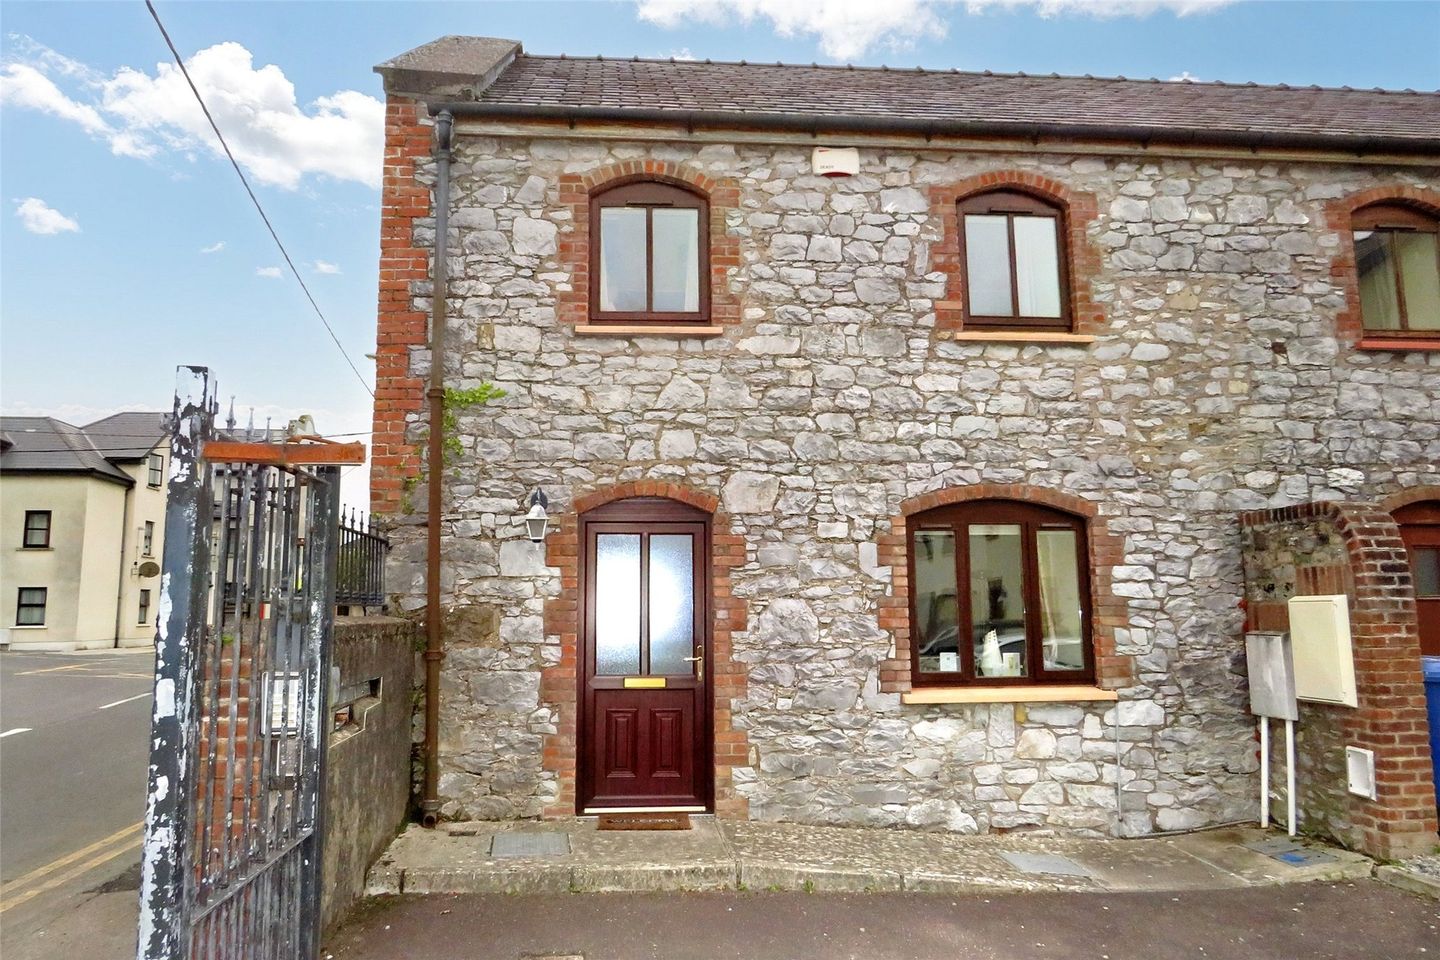 1 Granary Court, Bakers Road, Charleville, Co. Cork